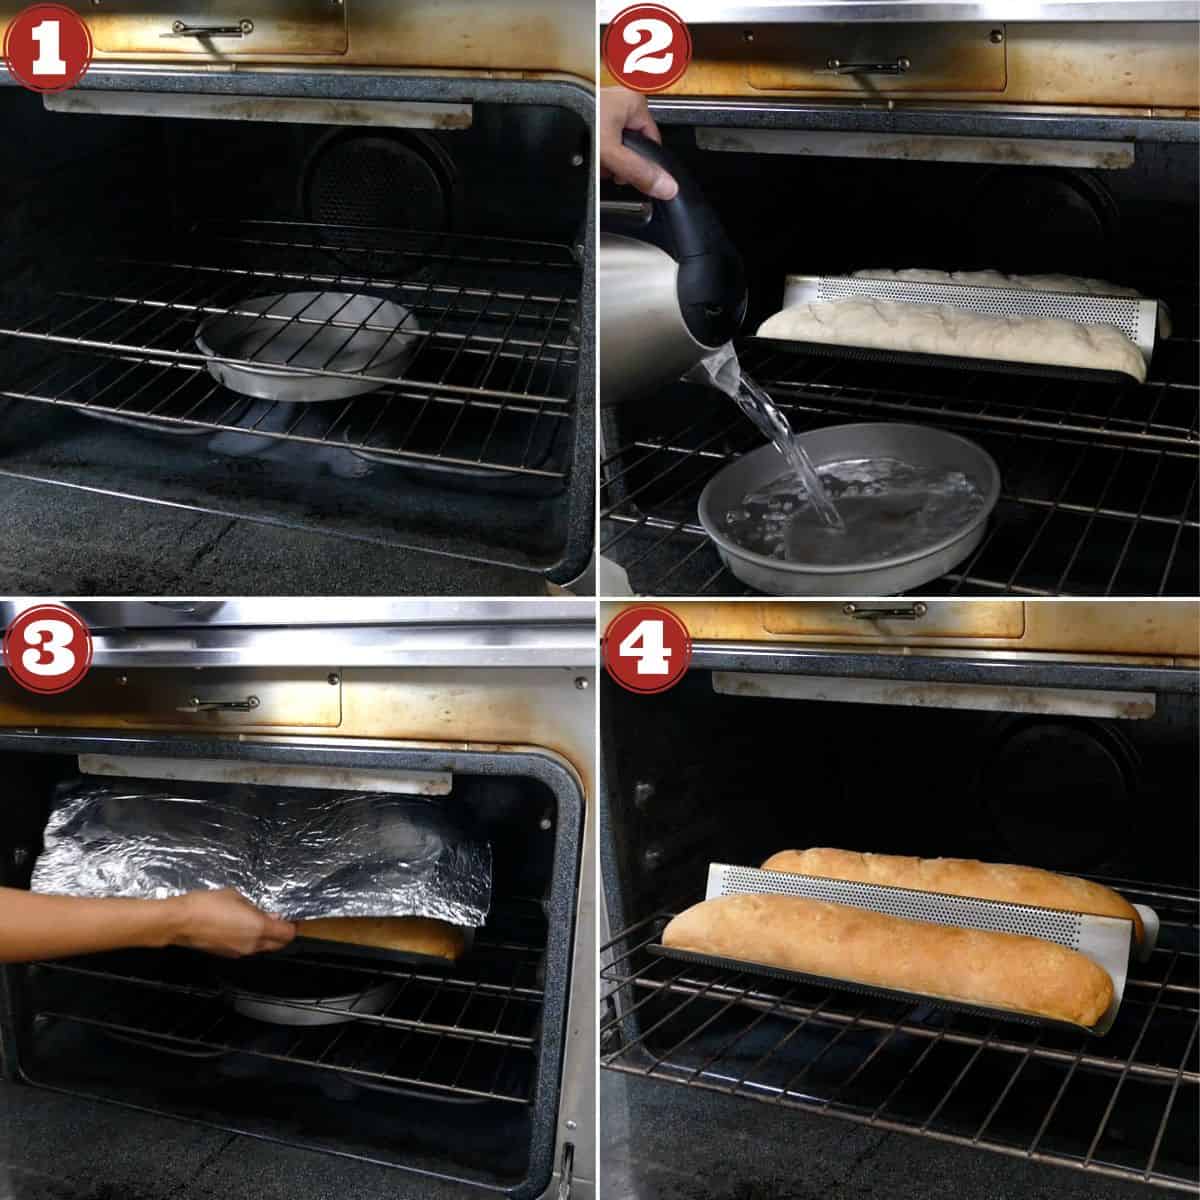 French baguette instructions collage - preparation for baking, and baked baguettes.